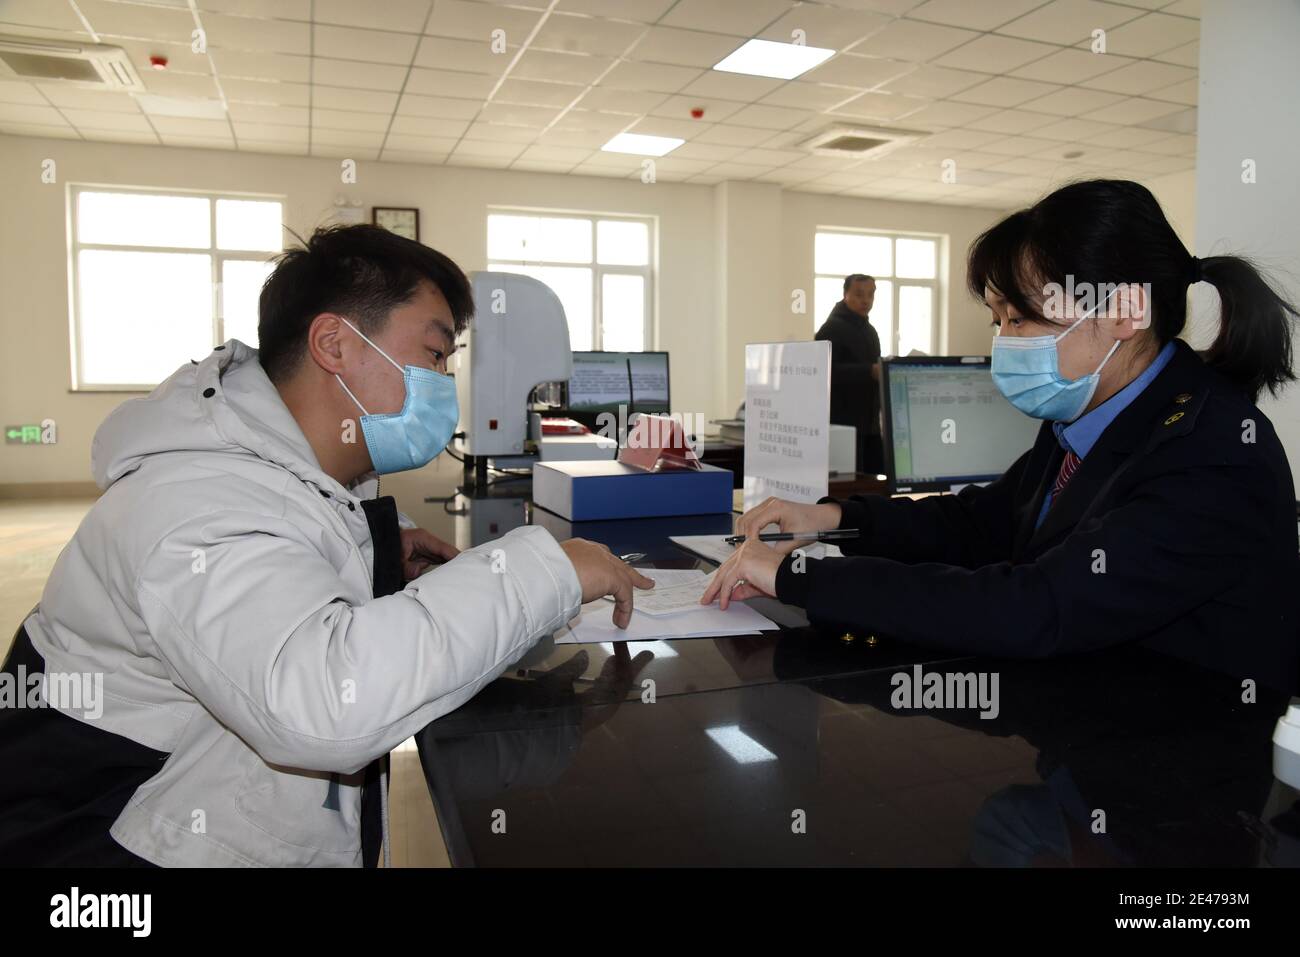 (210122) -- JINAN, Jan. 22, 2021 (Xinhua) -- A staff member (R) of the China Railway Jinan Group Co., Ltd. process consignment documents for a cargo owner in Dongjiazhen Township of Jinan City, capital of east China's Shandong Province, Jan. 21, 2021. The China Railway Jinan Group Co., Ltd. has been boosting the business of its 'Qilu' freight trains to Europe and other parts of Asia by steadily streamlining cargo flows in recent years. A total of 1,506 'Qilu' trains left Shandong in 2020, a year-on-year growth of 42.9 percent. These trains have served as 'accelerators' to Shandong's opening up Stock Photo